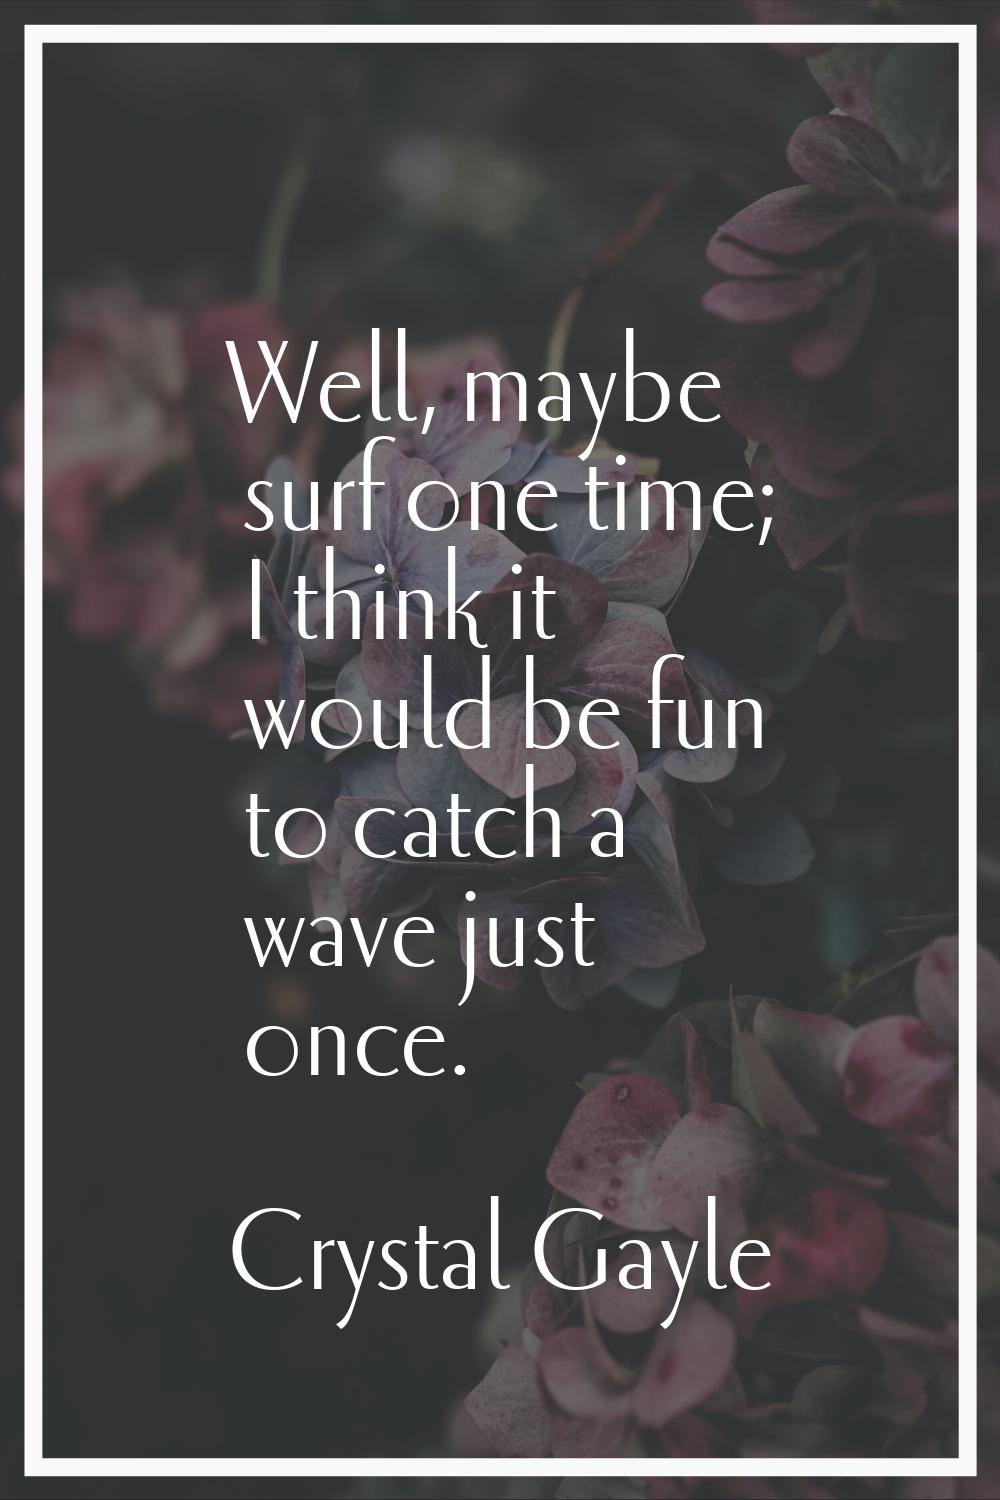 Well, maybe surf one time; I think it would be fun to catch a wave just once.